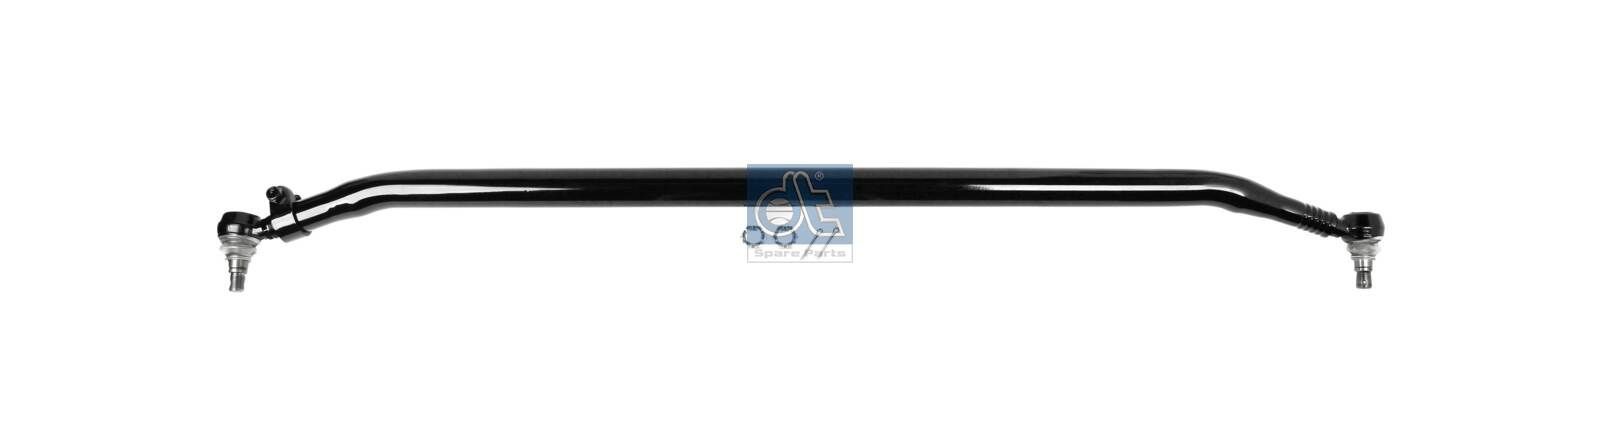 DT Spare Parts 6.53013 Rod Assembly 7422 163 635